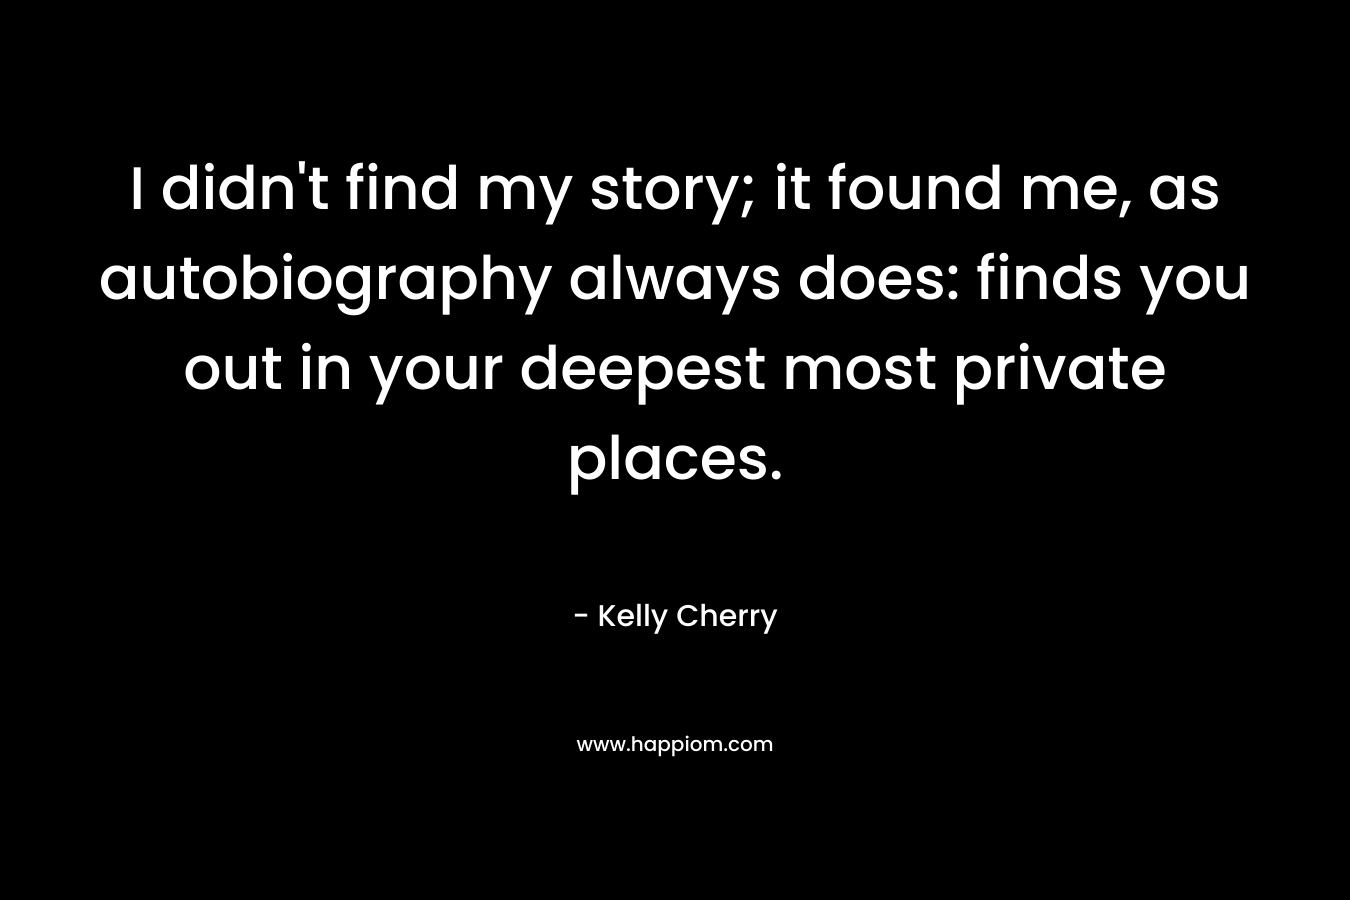 I didn’t find my story; it found me, as autobiography always does: finds you out in your deepest most private places. – Kelly Cherry